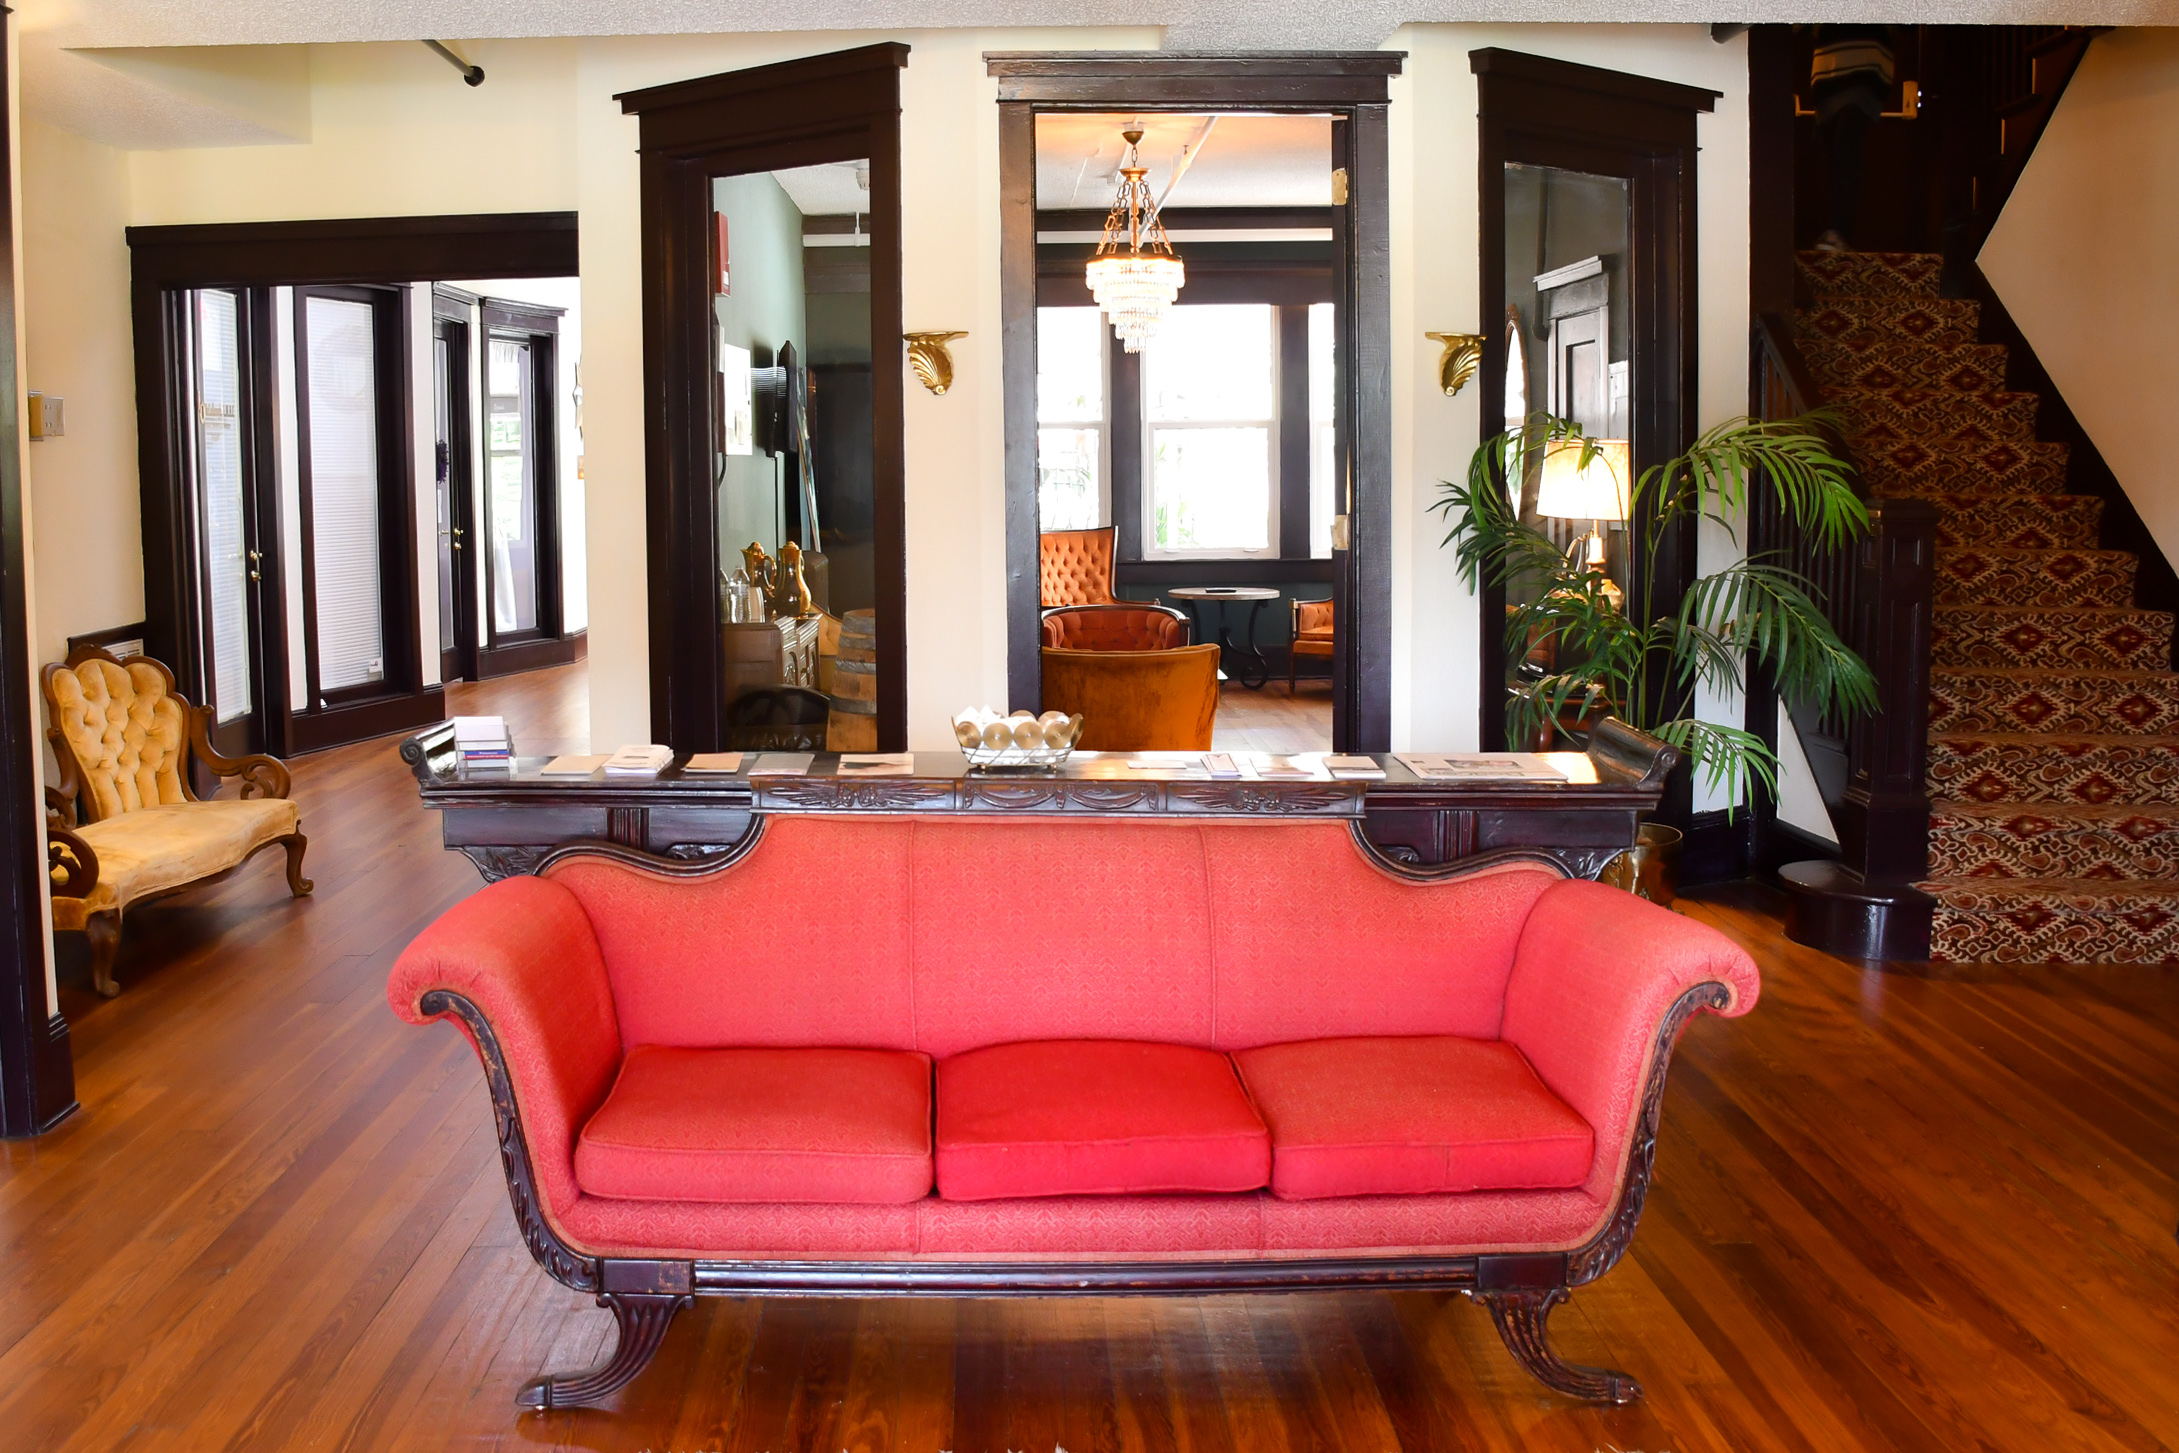 The DeLand Hotel Lobby and Lounge Vintage Appeal